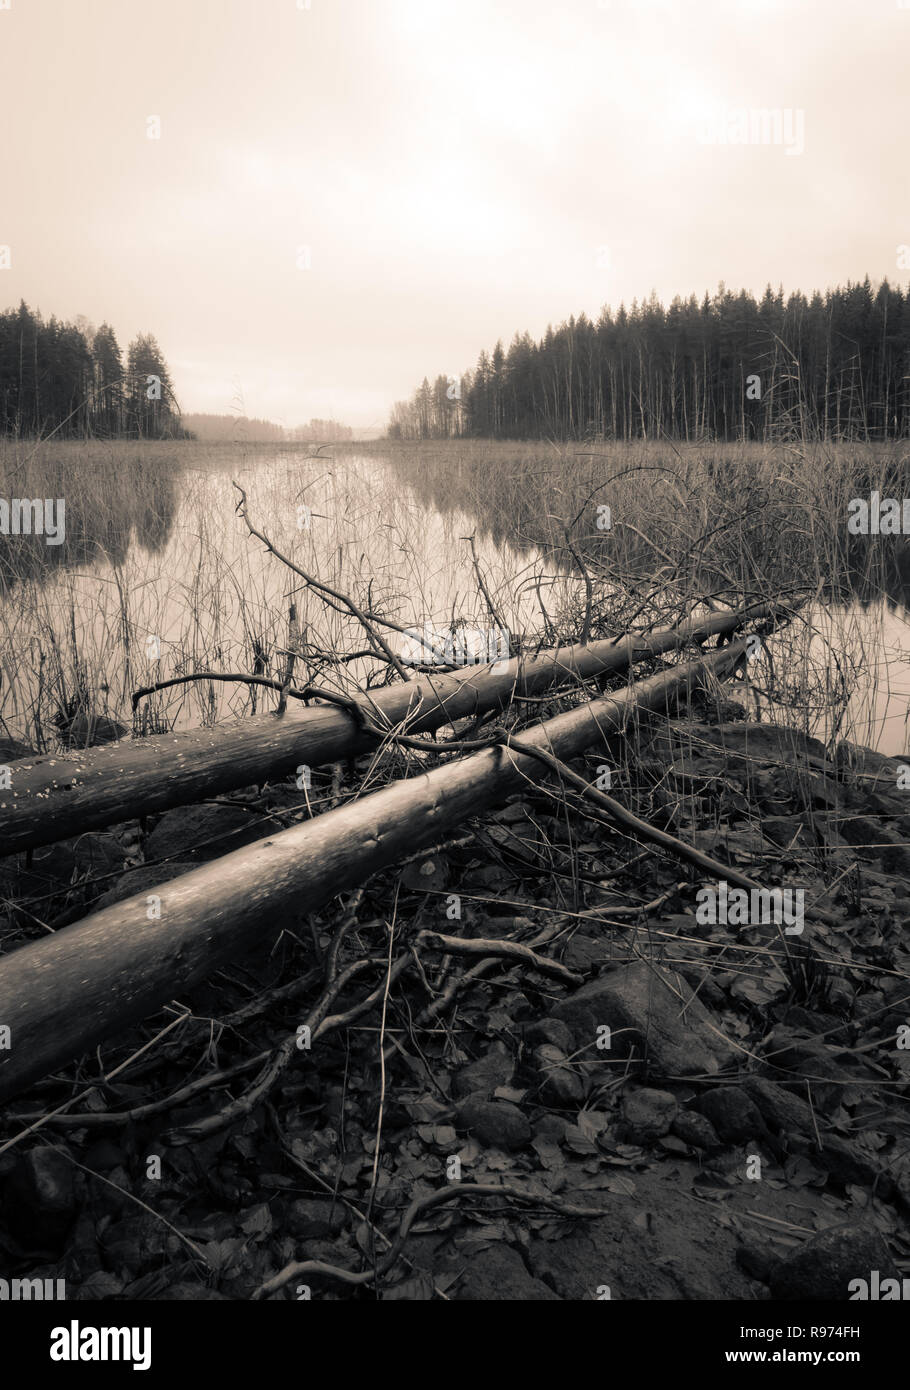 Dead trees lying on a shore of a lake in autumn, sepia toned moody landscape. Stock Photo